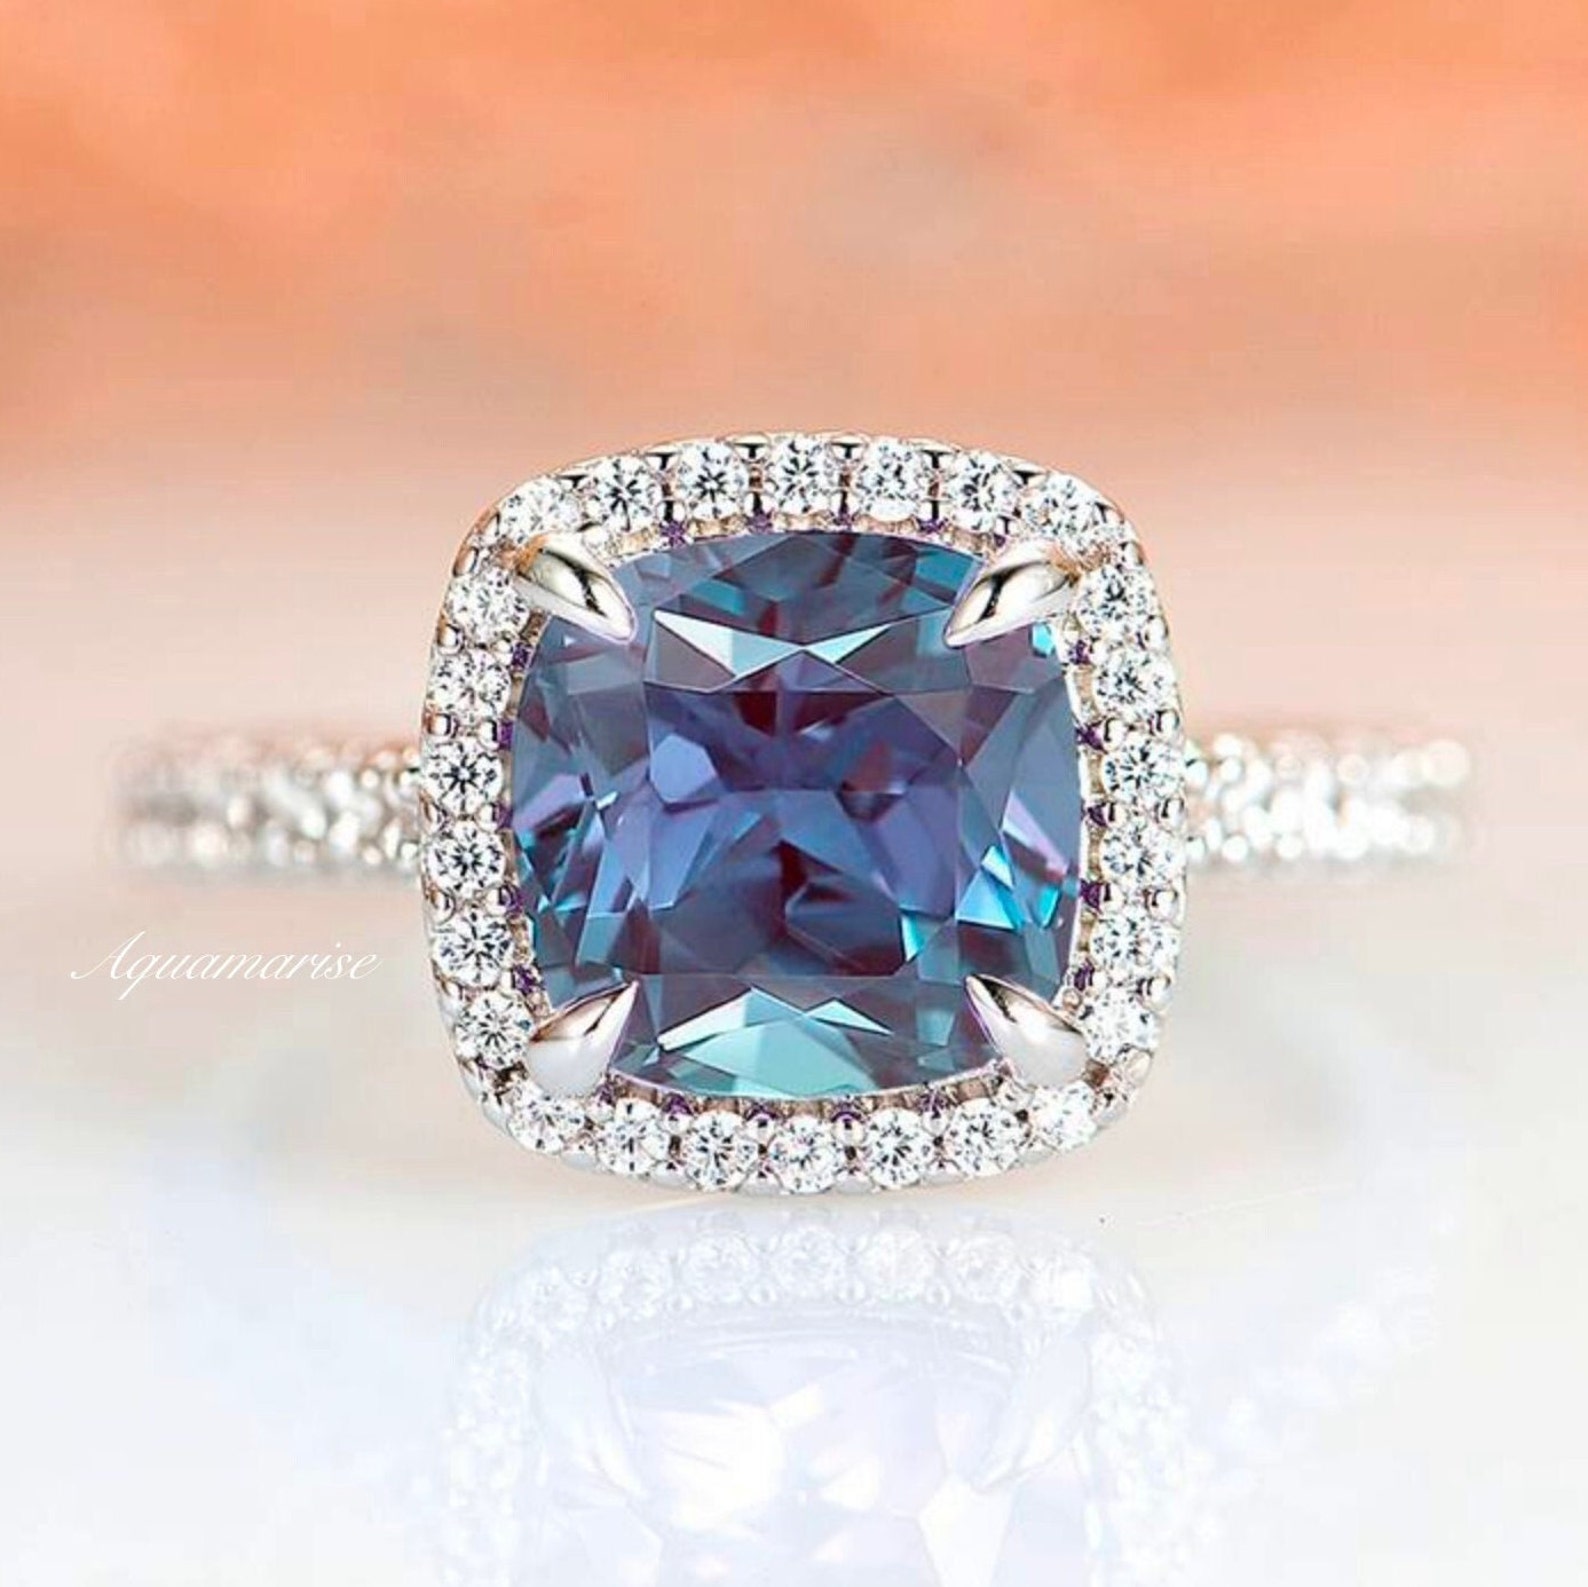 Cushion Cut Alexandrite Ring Sterling Silver Ring Teal & - Etsy